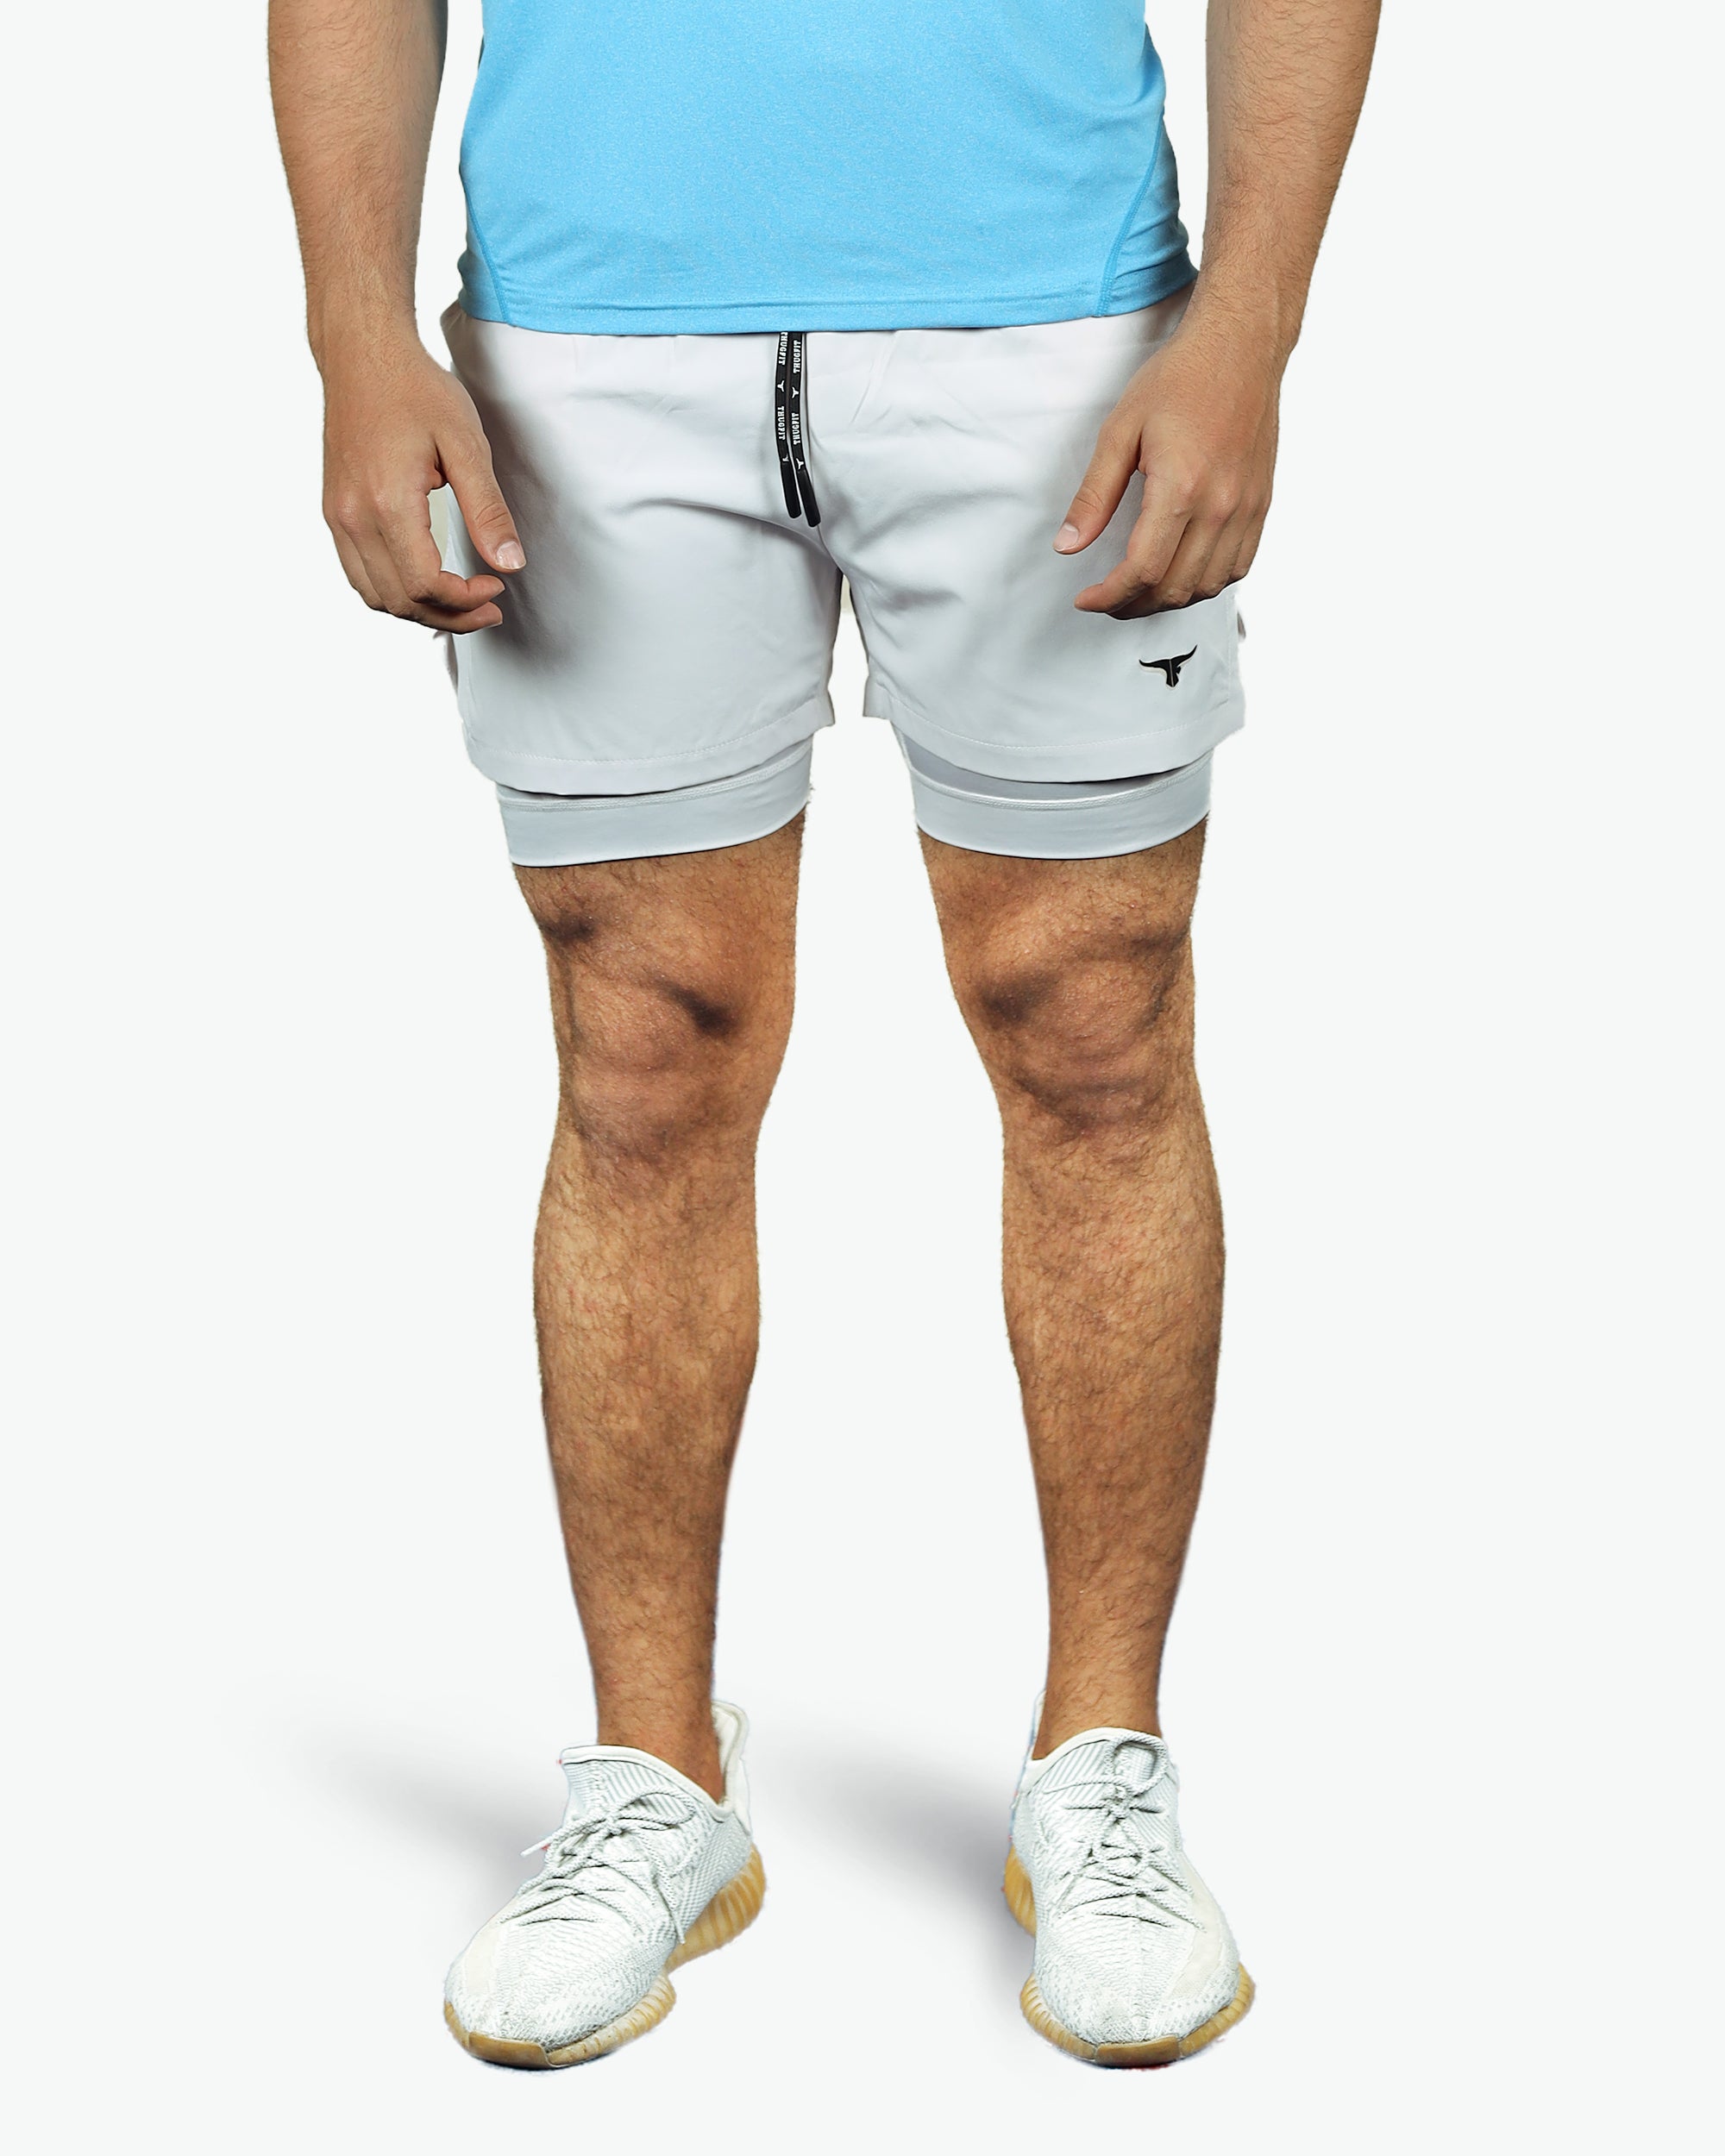 SprintHint 2 in 1 Shorts 7" Inseam - THUGFIT